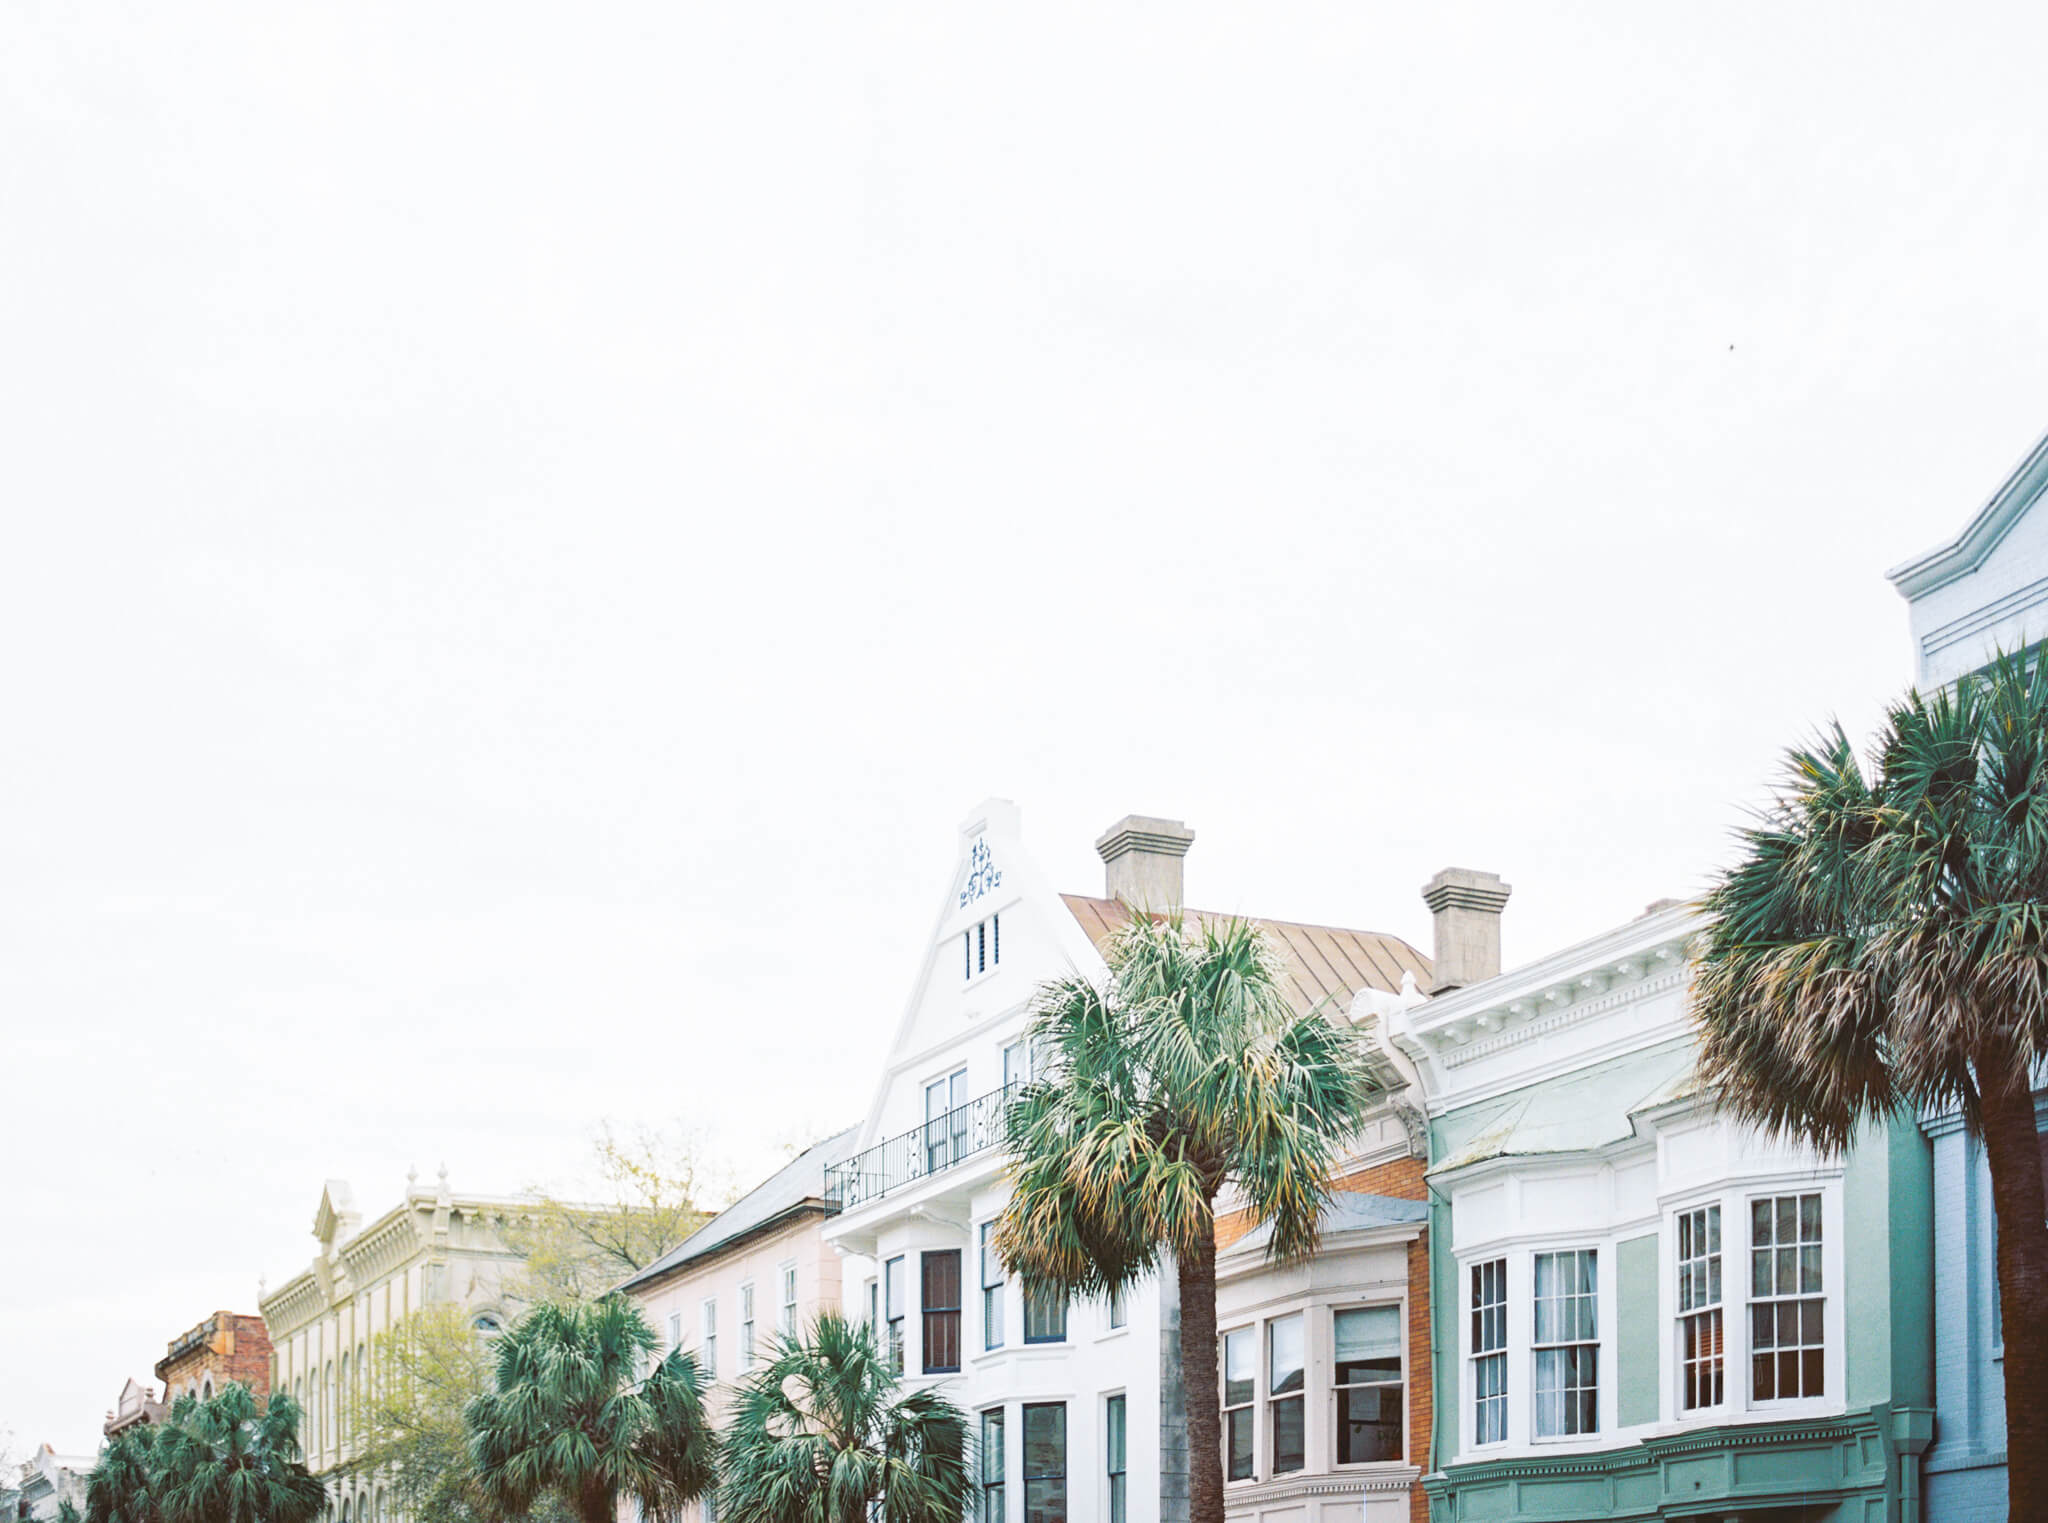 A row of colorful houses with palm trees in Charleston.